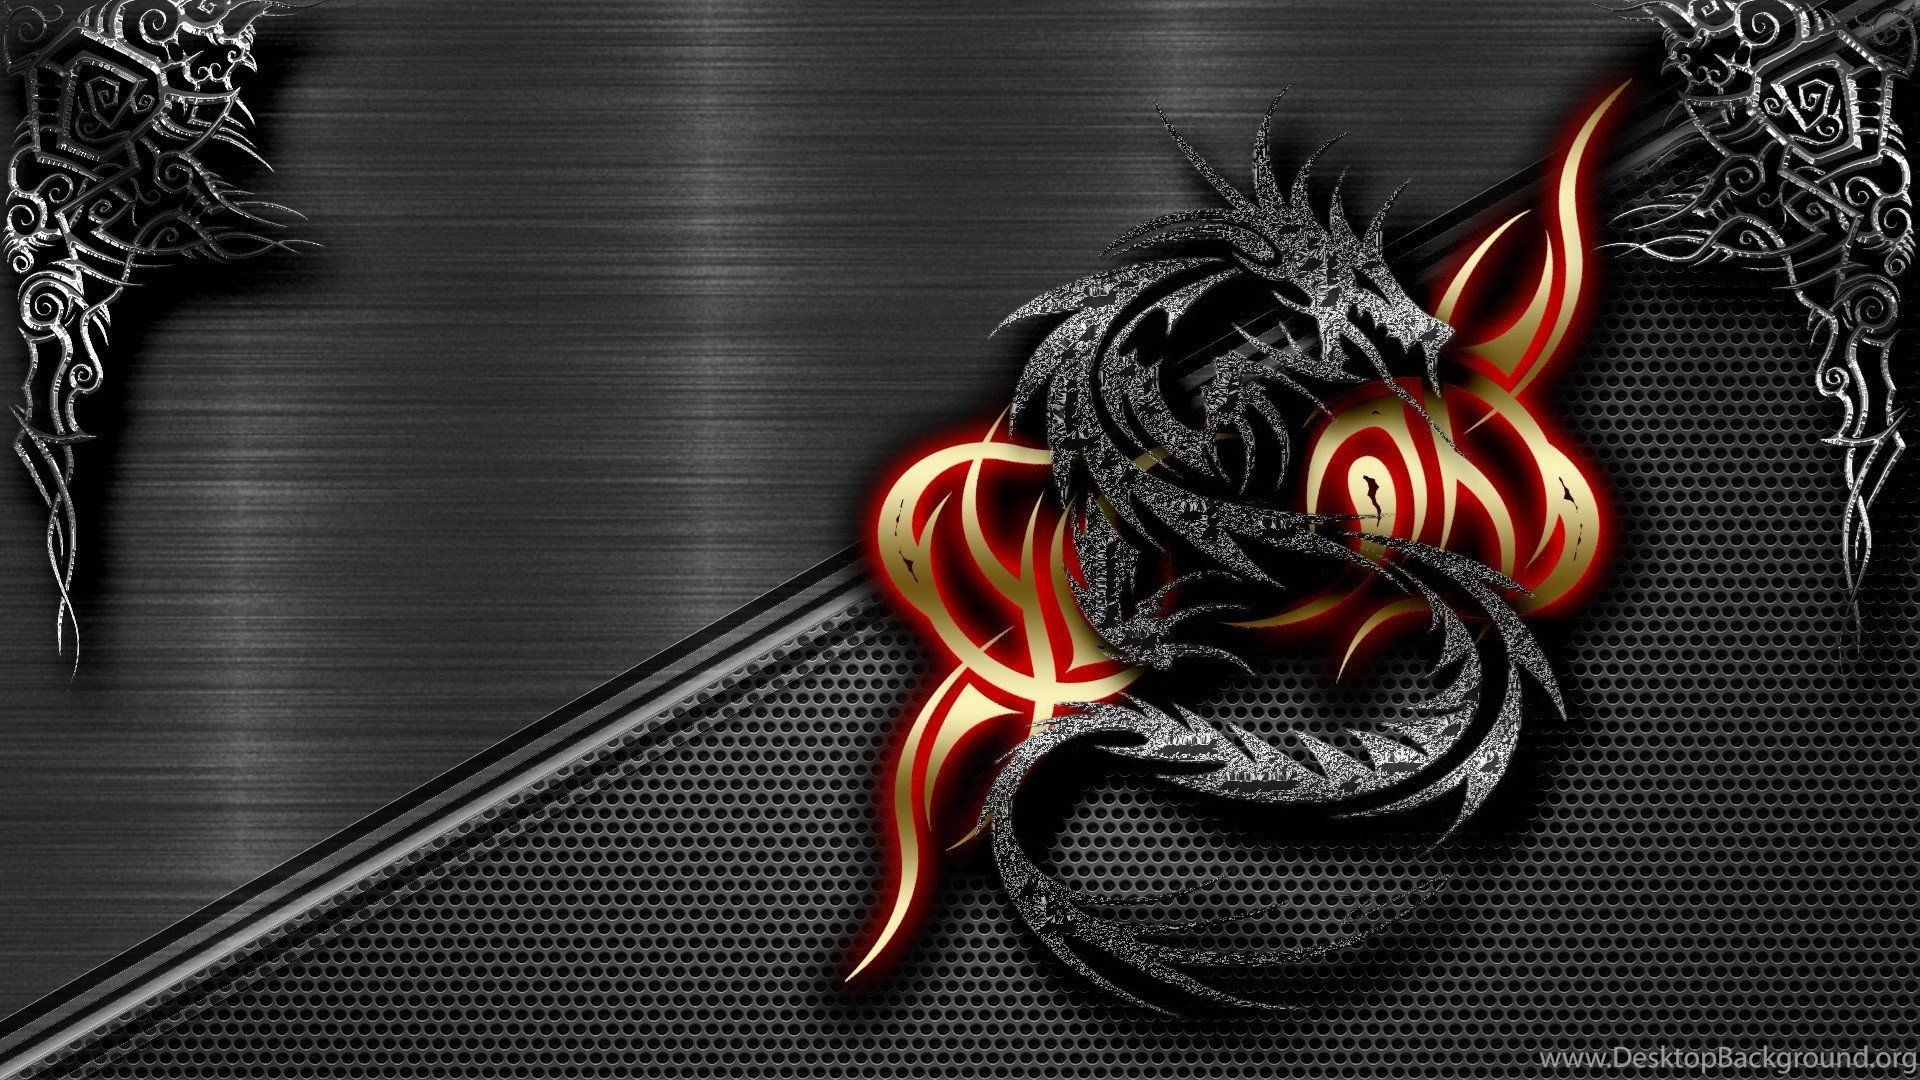 Wallpaper Black and Red Dragon Illustration Background  Download Free  Image